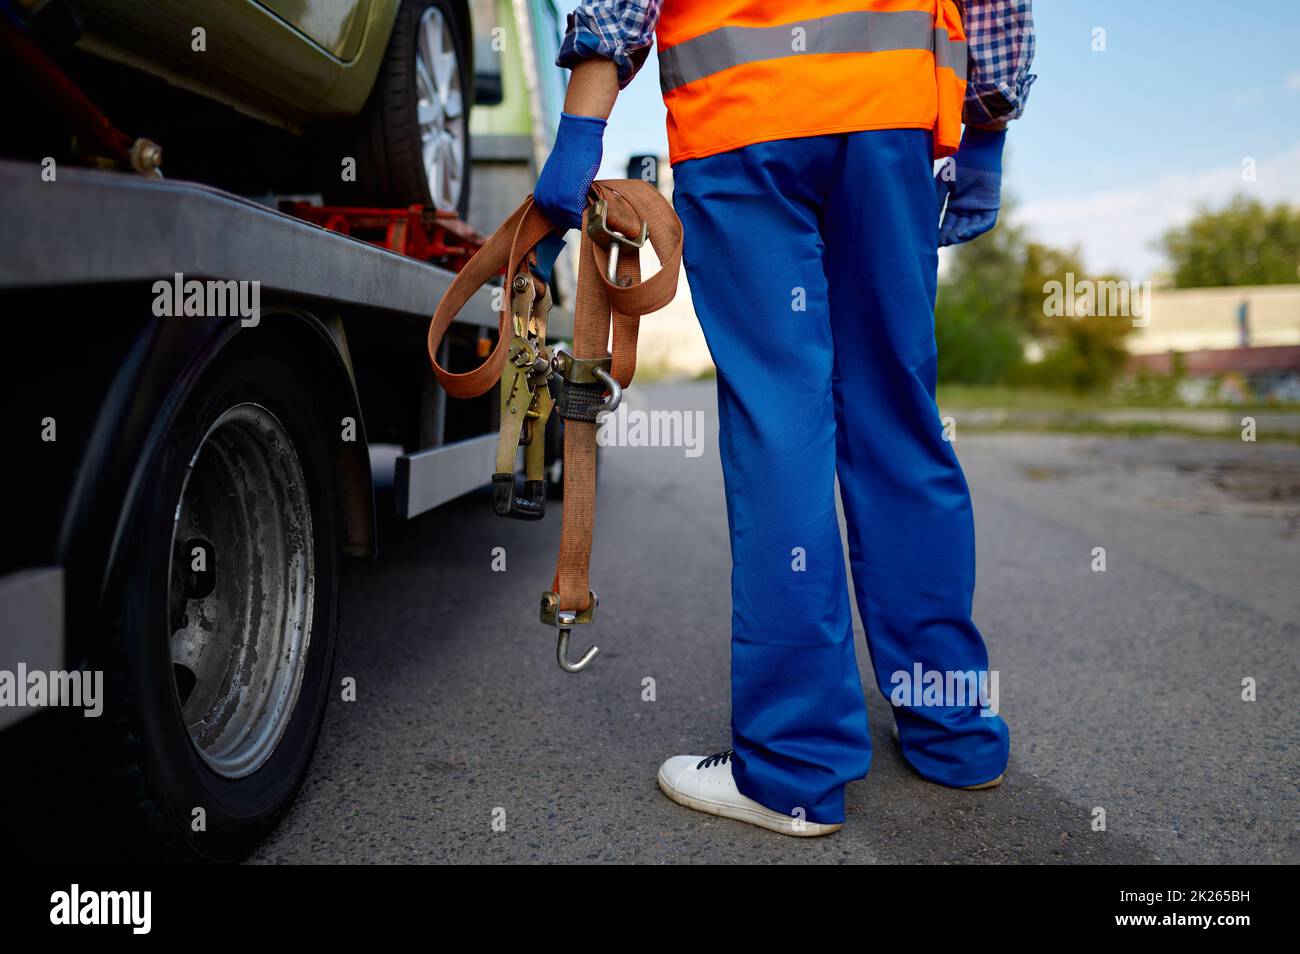 Male tow truck assistant holding fastening belts Stock Photo